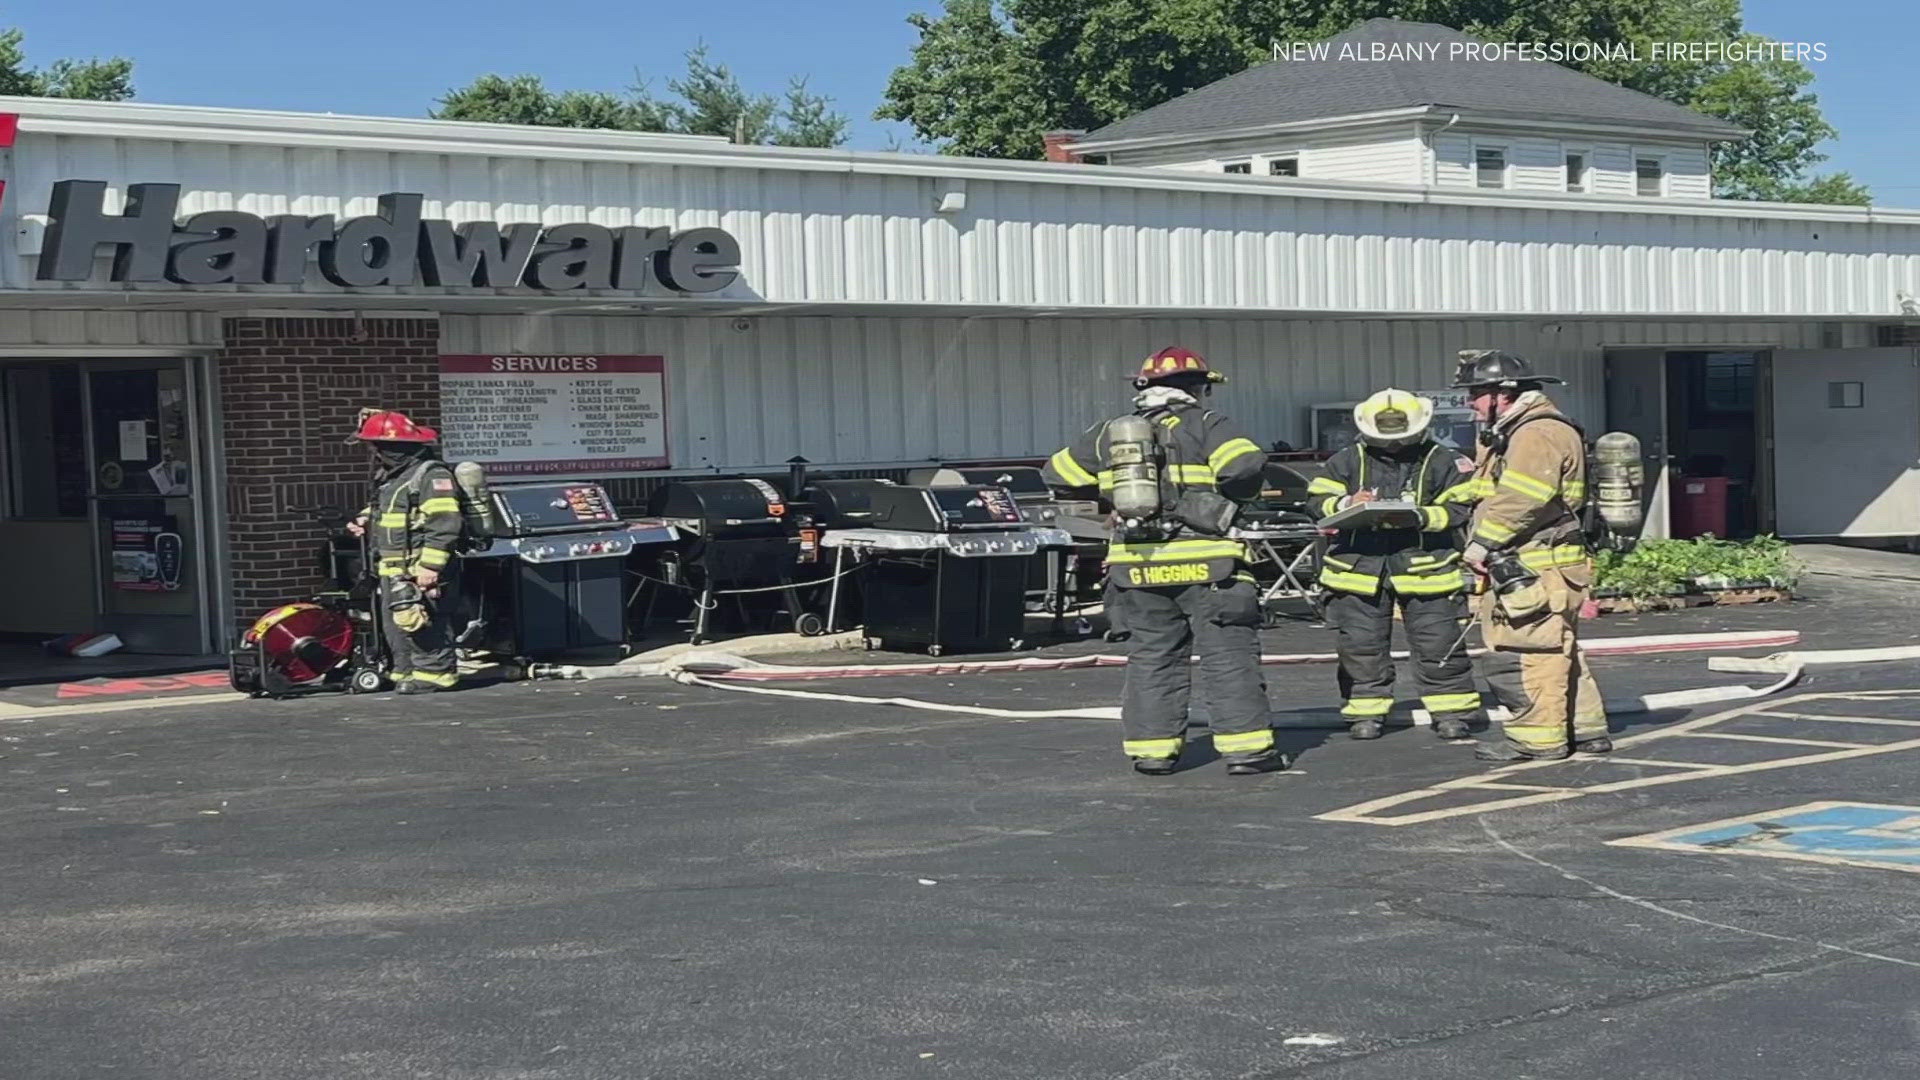 New Albany city officials say there was a "buildup of carbon monoxide" at a local business Thursday morning.